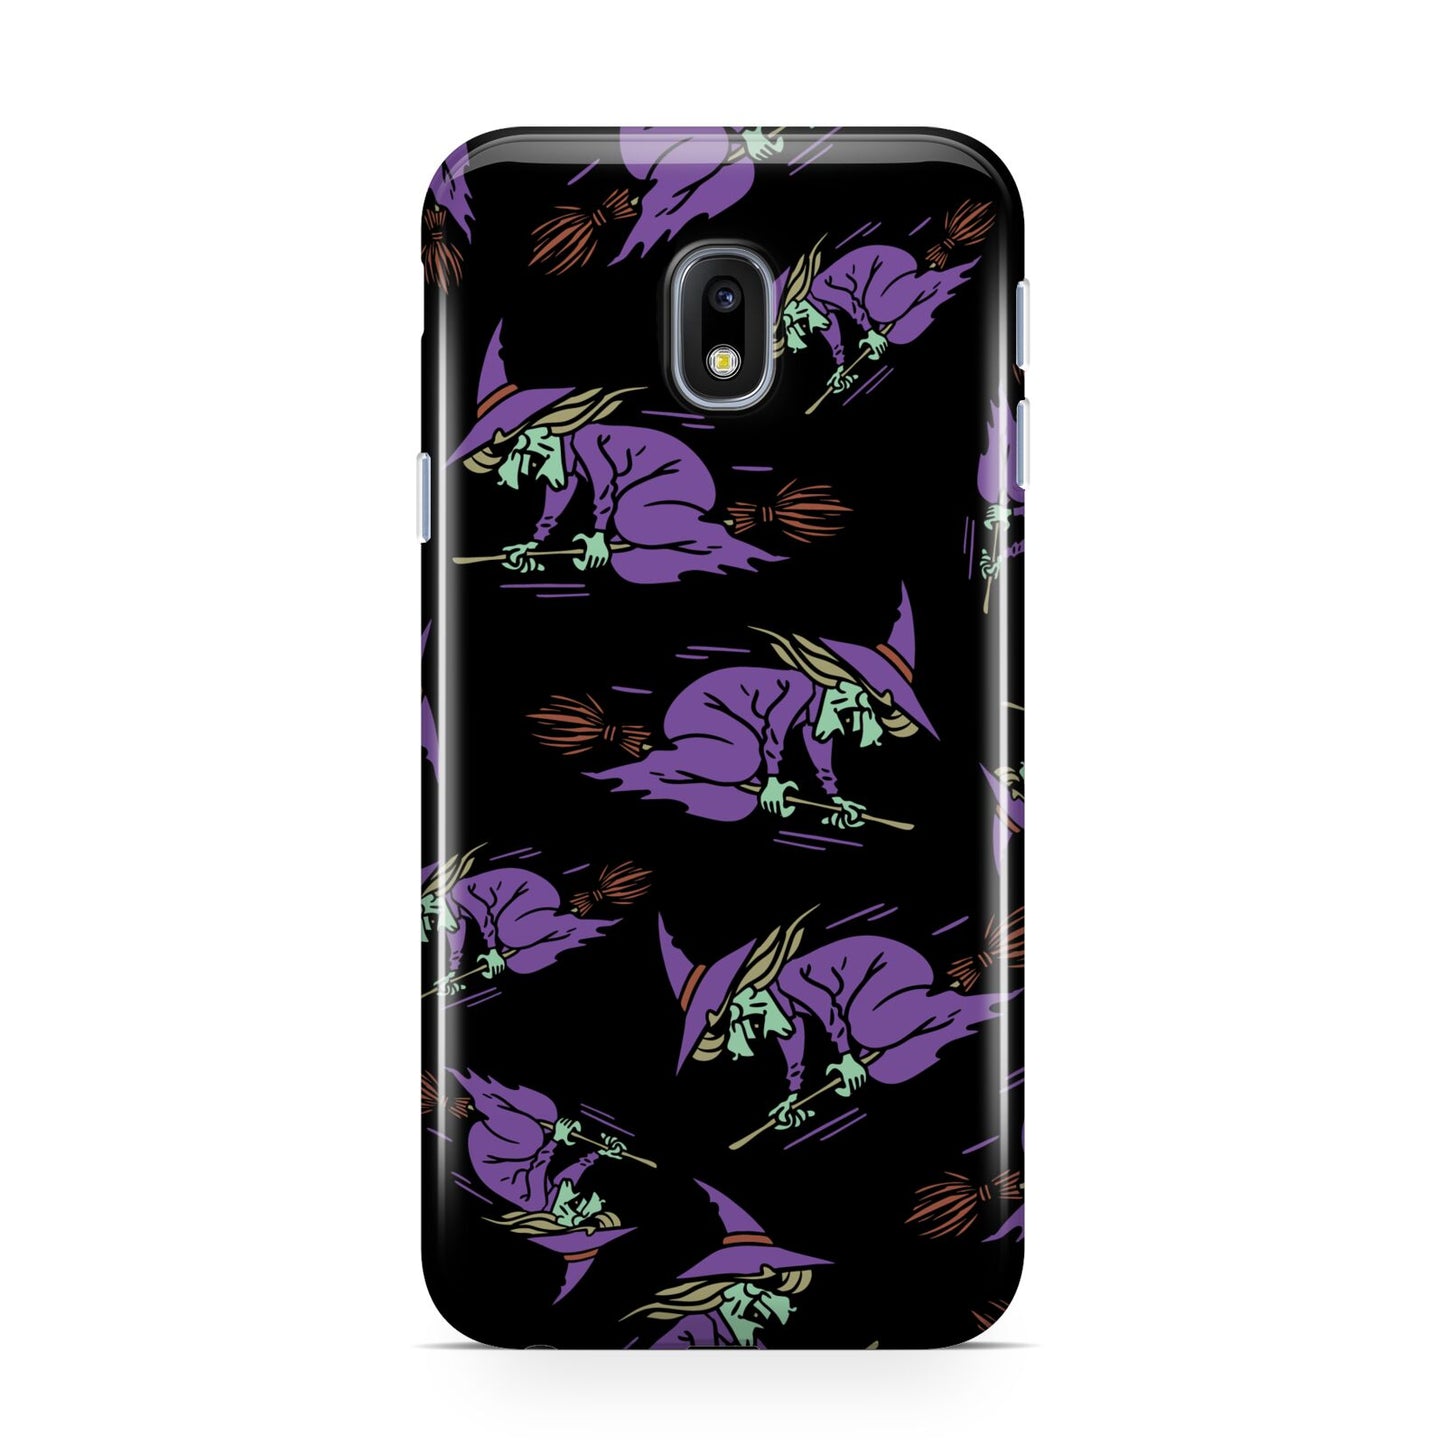 Flying Witches Samsung Galaxy J3 2017 Case